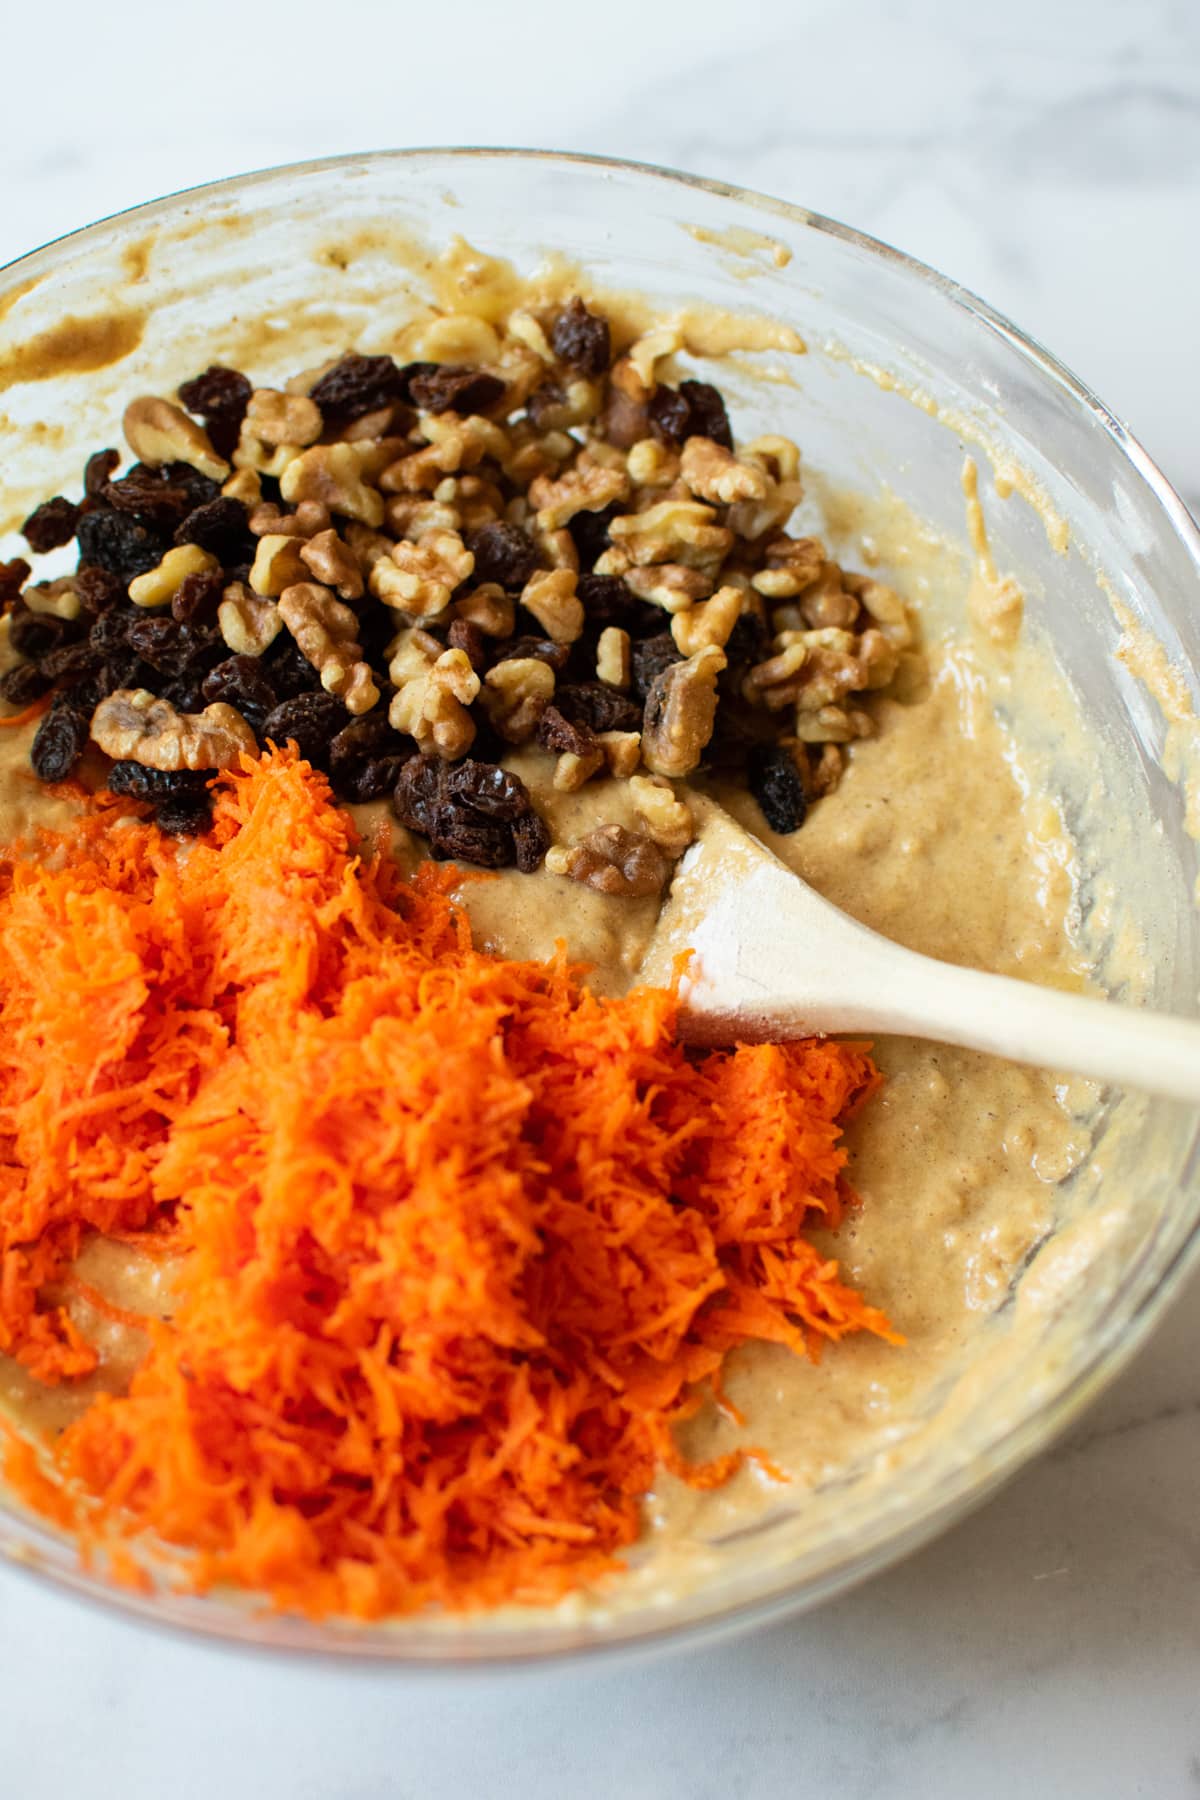 bowl of muffin batter with shredded carrots, raisins and walnuts